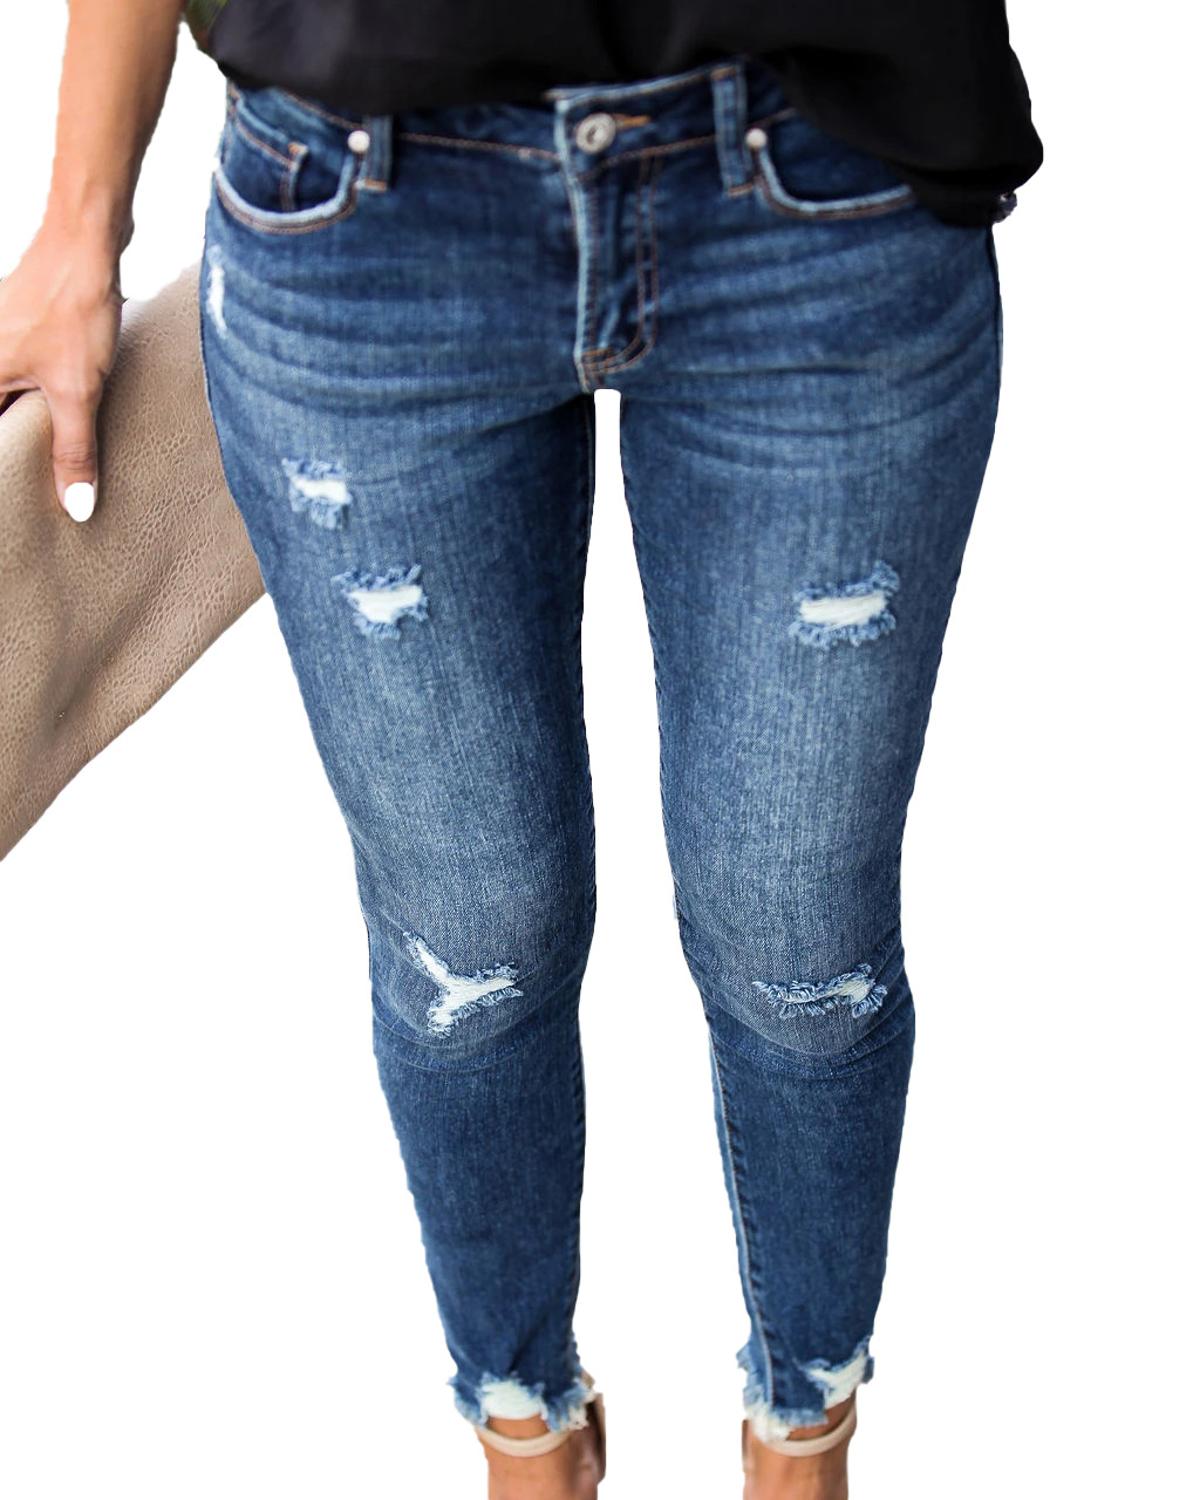 Elegant Urban Chic Women's Ripped Jeans with Pencil Fit